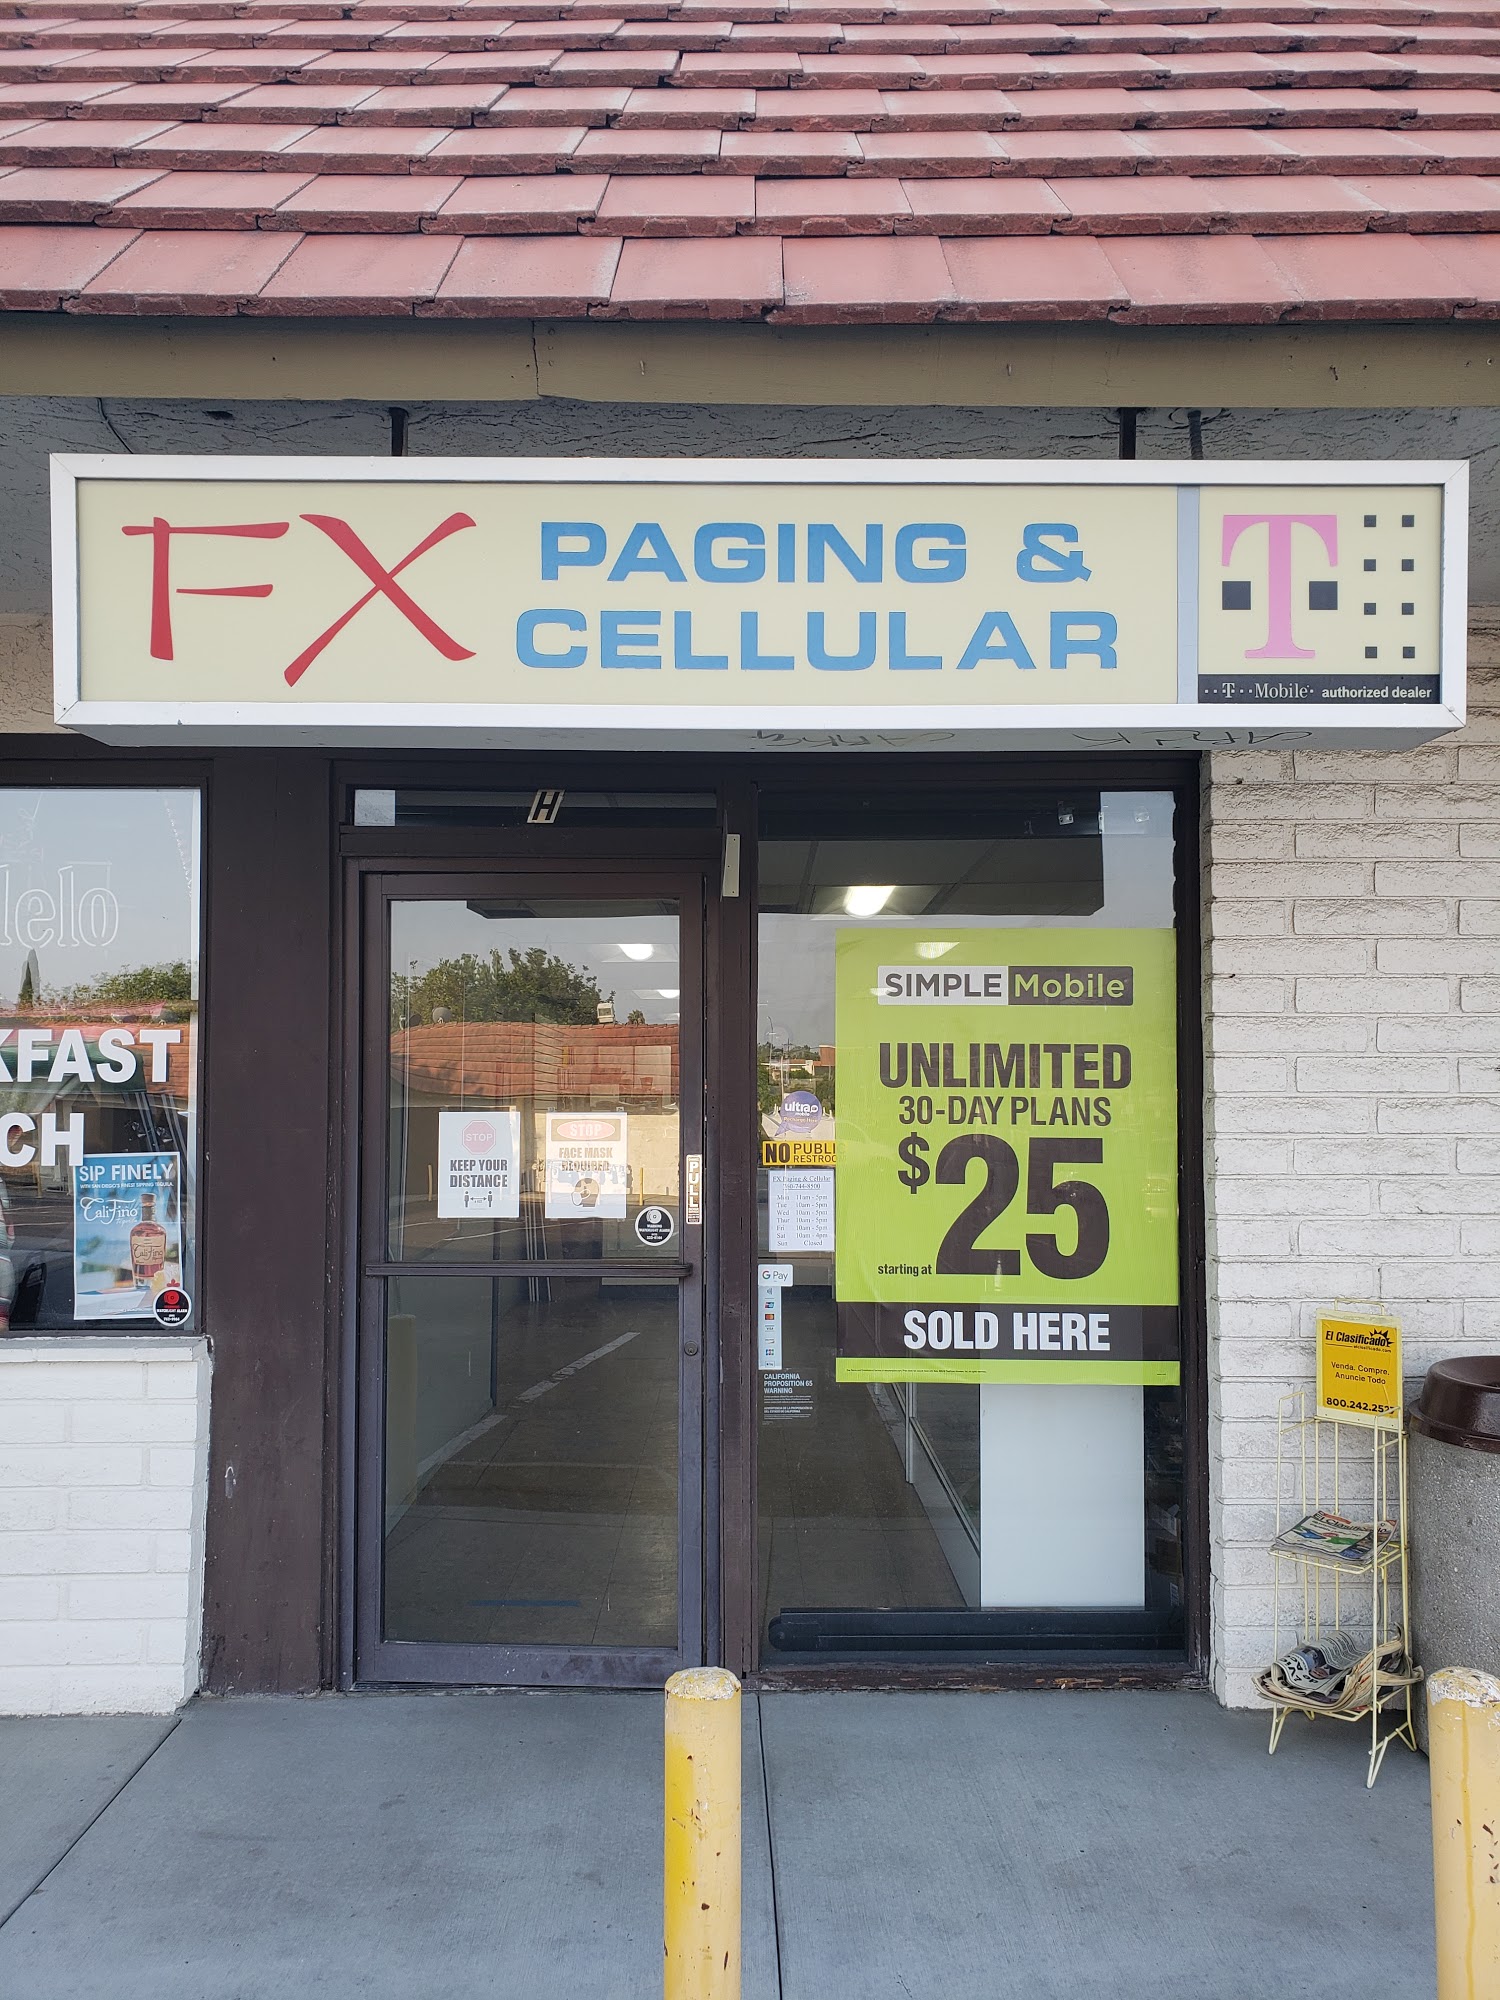 FX Paging & Cellular